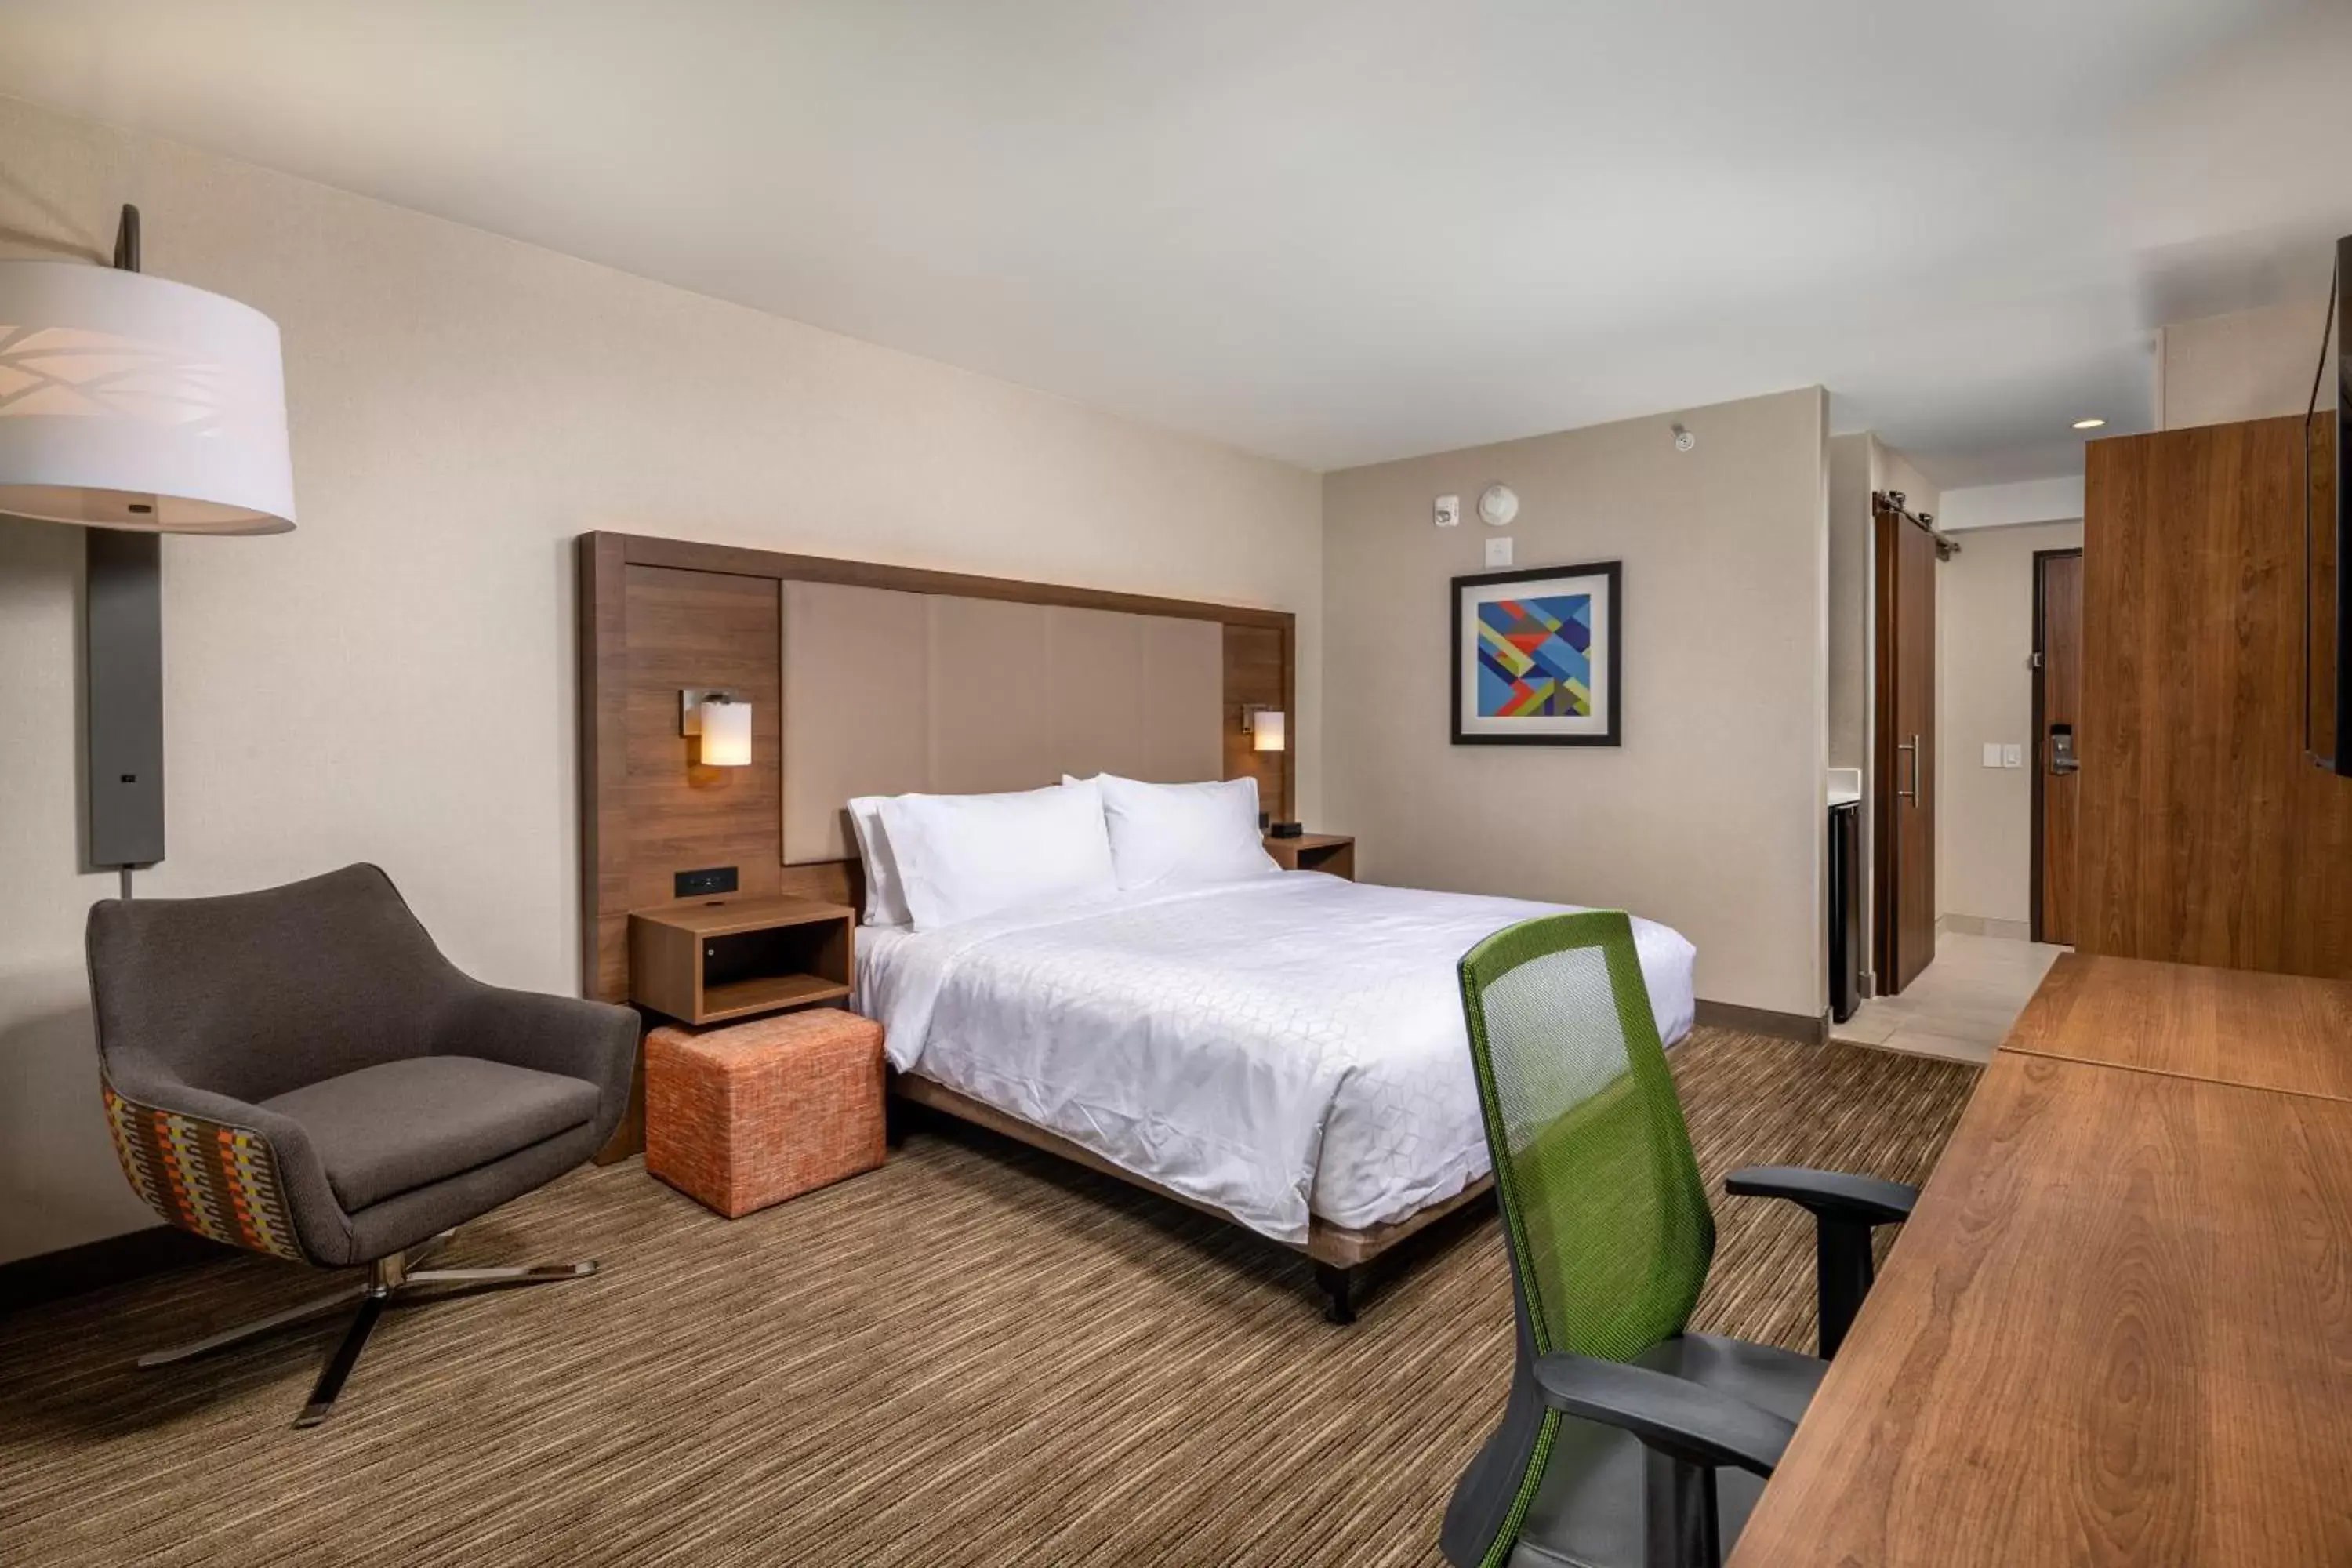 Bed, Room Photo in Holiday Inn Express & Suites Chatsworth, an IHG Hotel